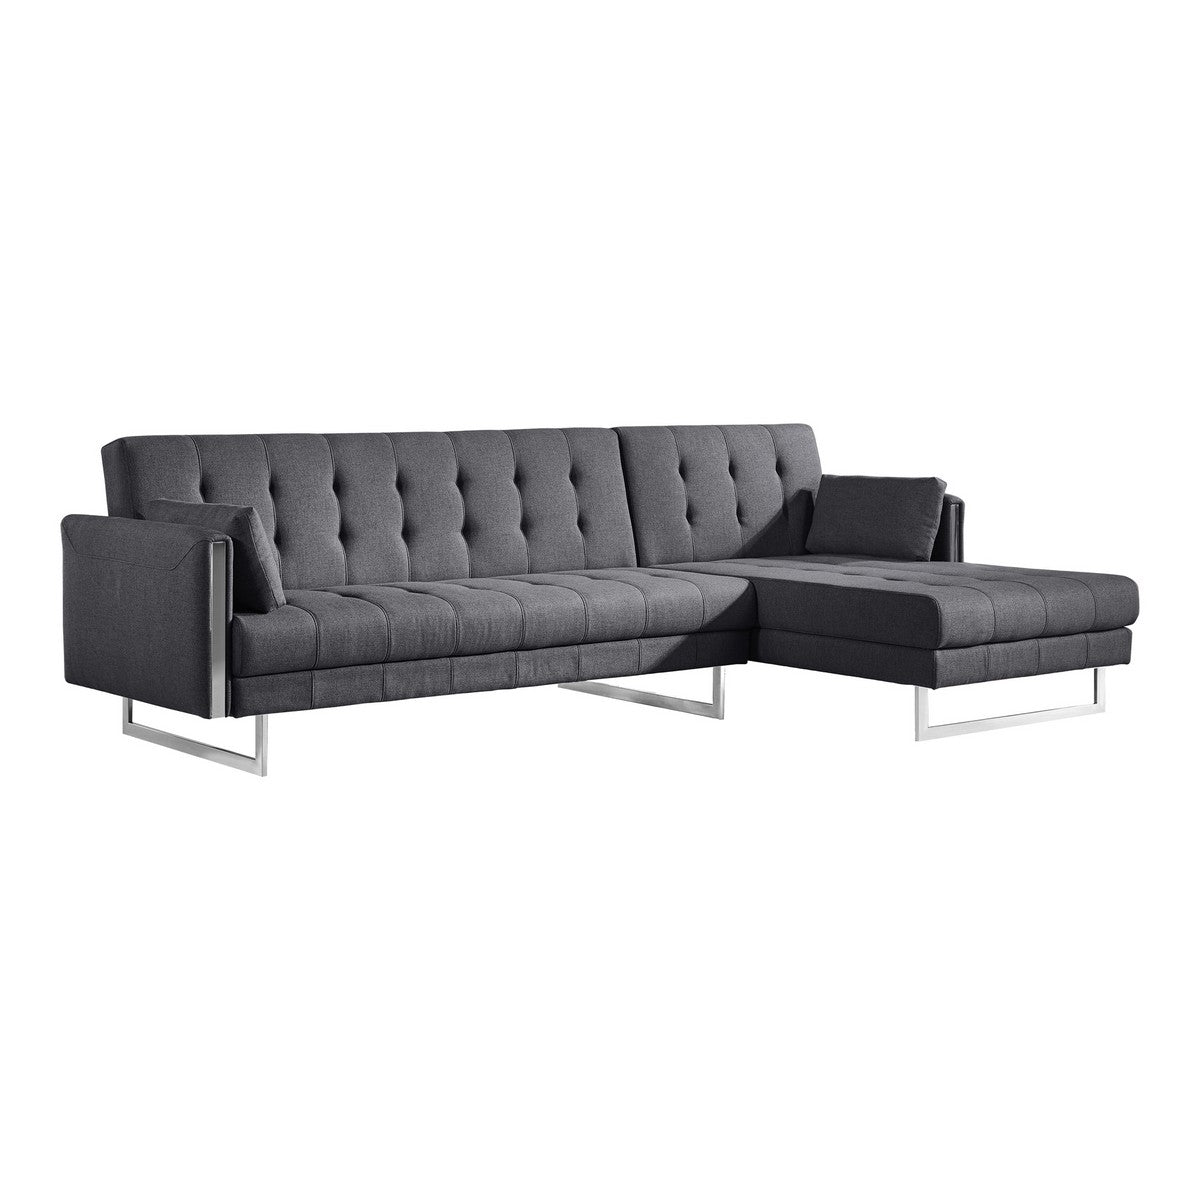 Moe's Home Collection Palomino Sofa Bed Right Dark Grey - MT-1003-15-R - Moe's Home Collection - Sofa Beds - Minimal And Modern - 1